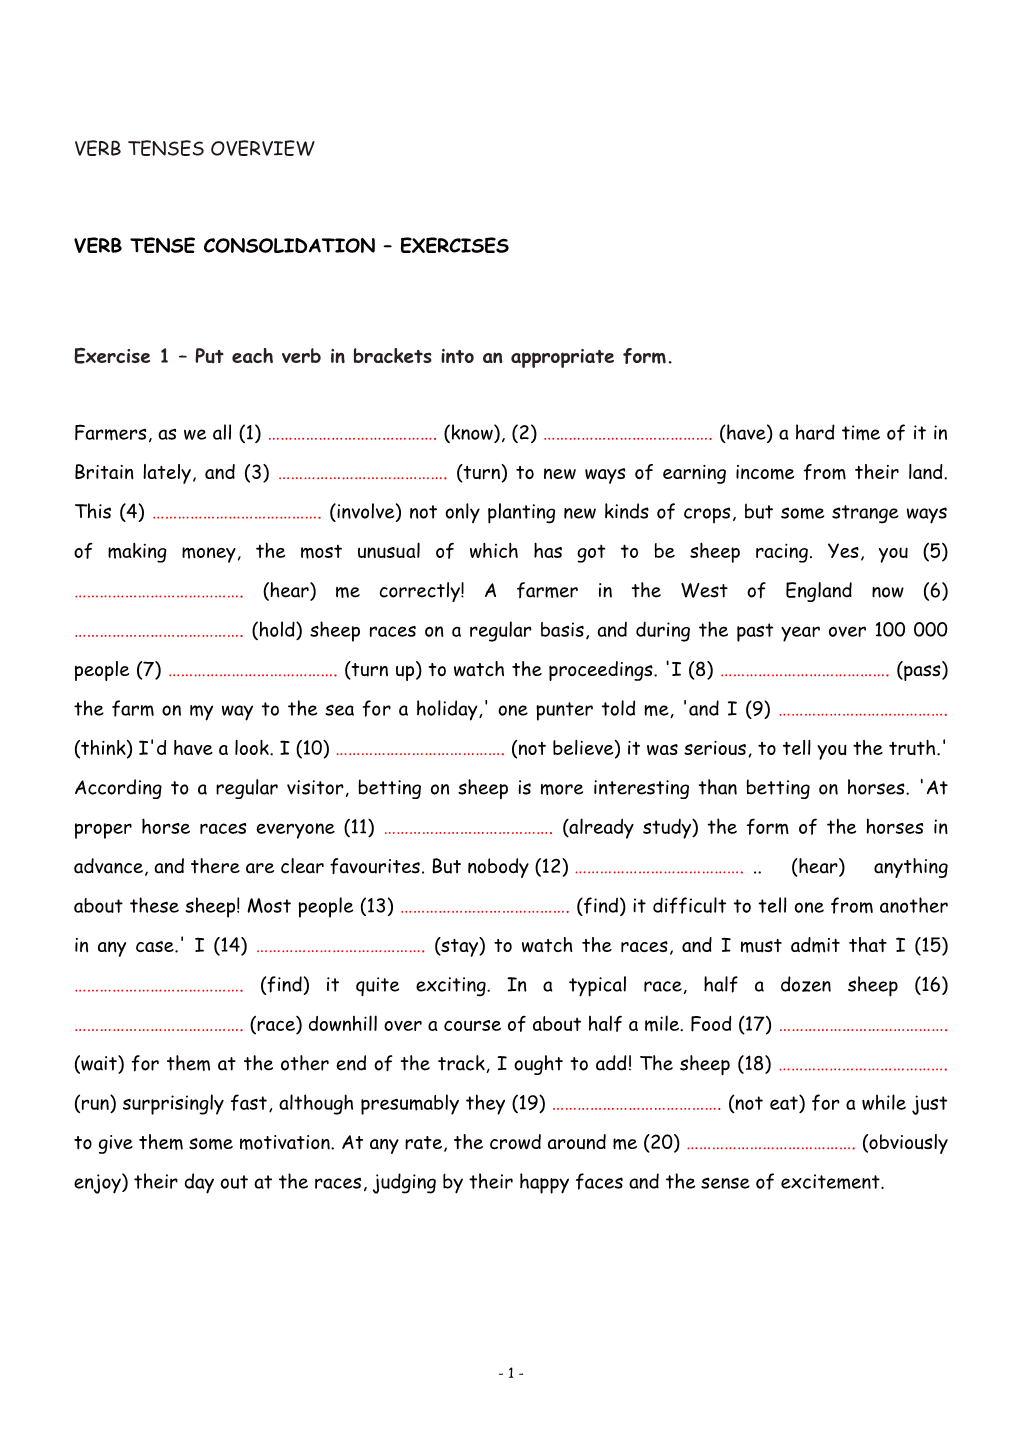 Verb Tense Consolidation Exercises